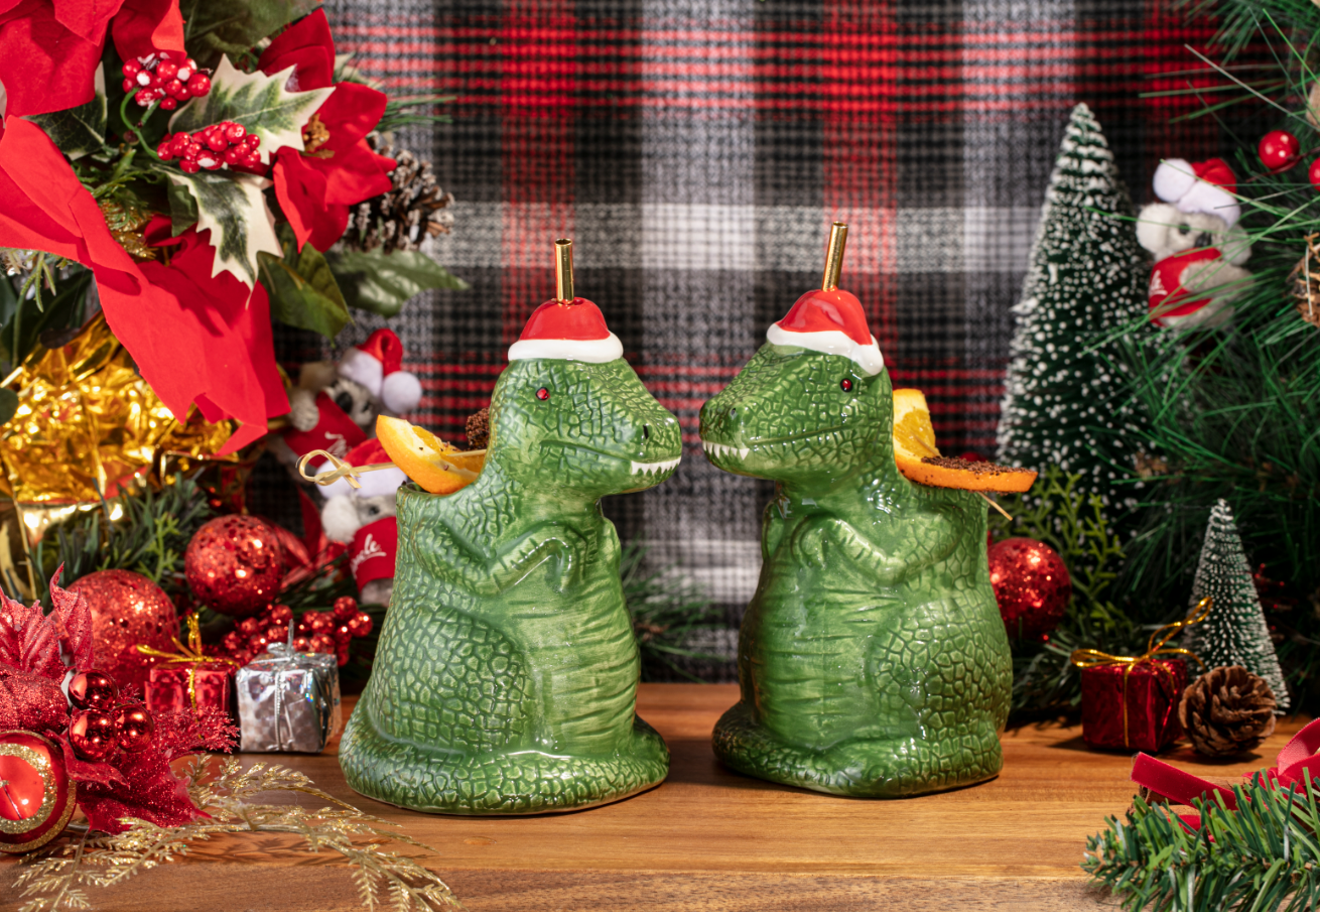 The Rudolph's Replacement comes in an adorable dinosaur mug. The mugs are also available for purchase.